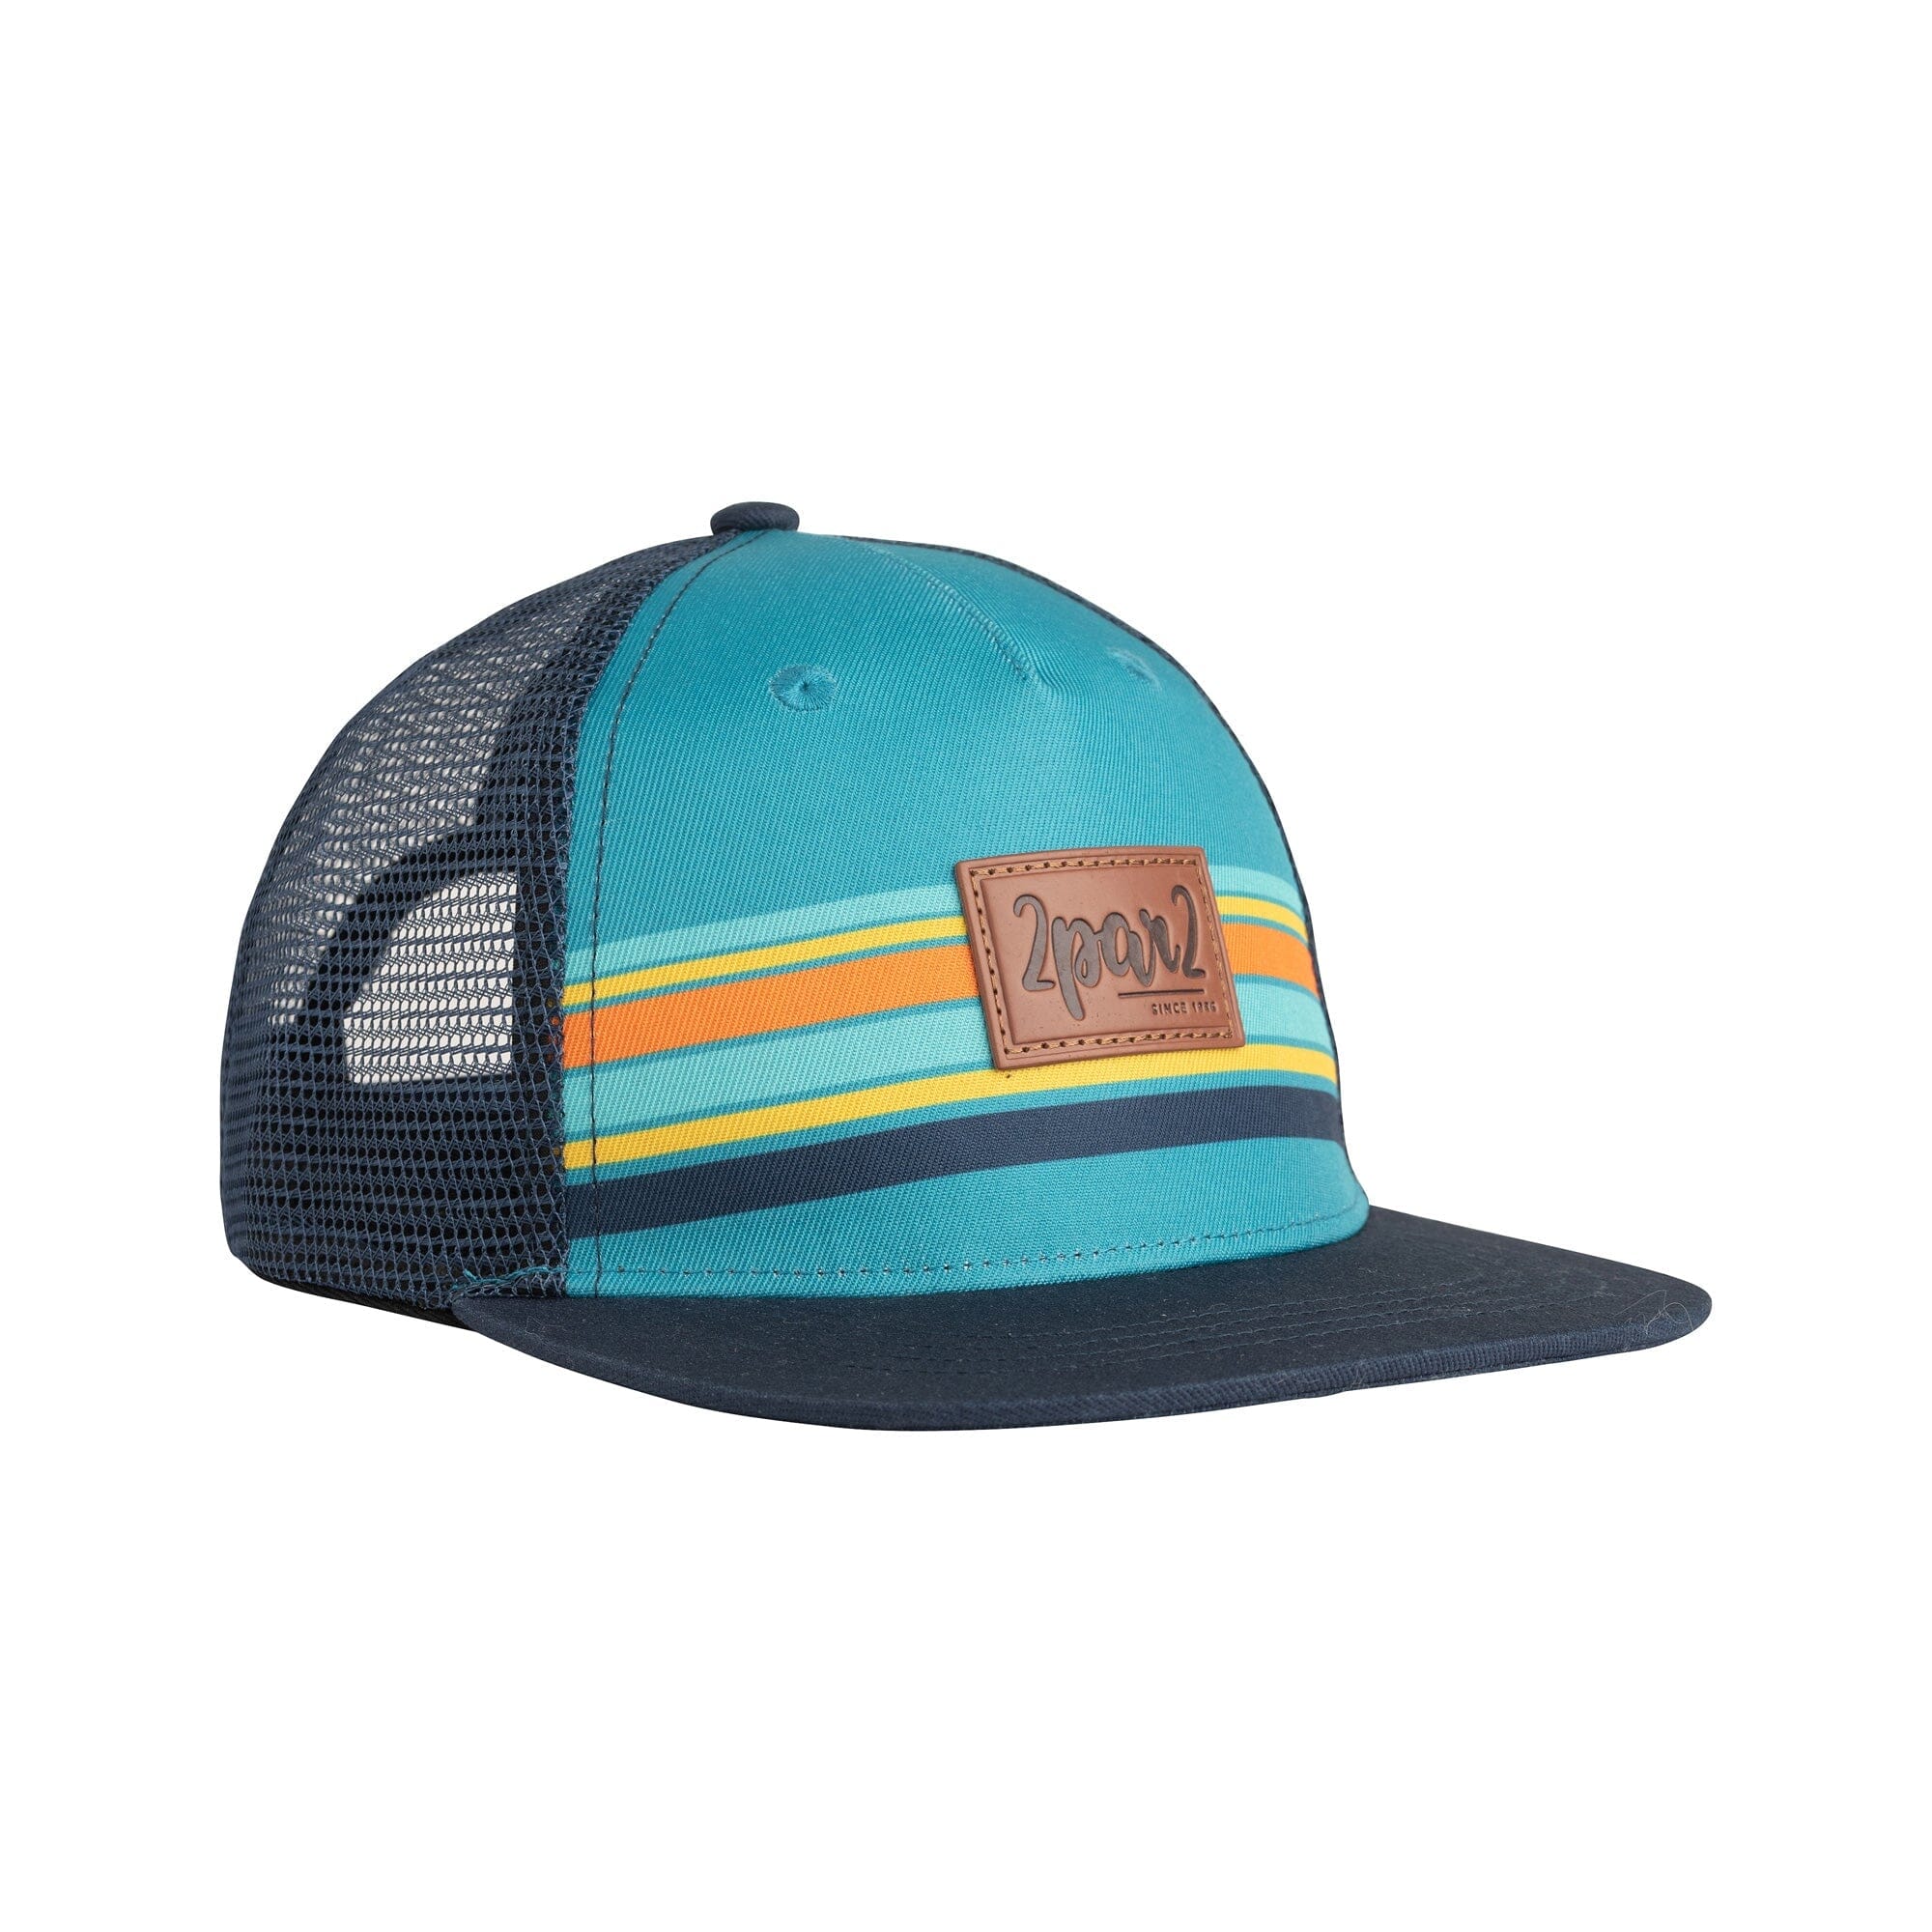 Casquette rayée turquoise